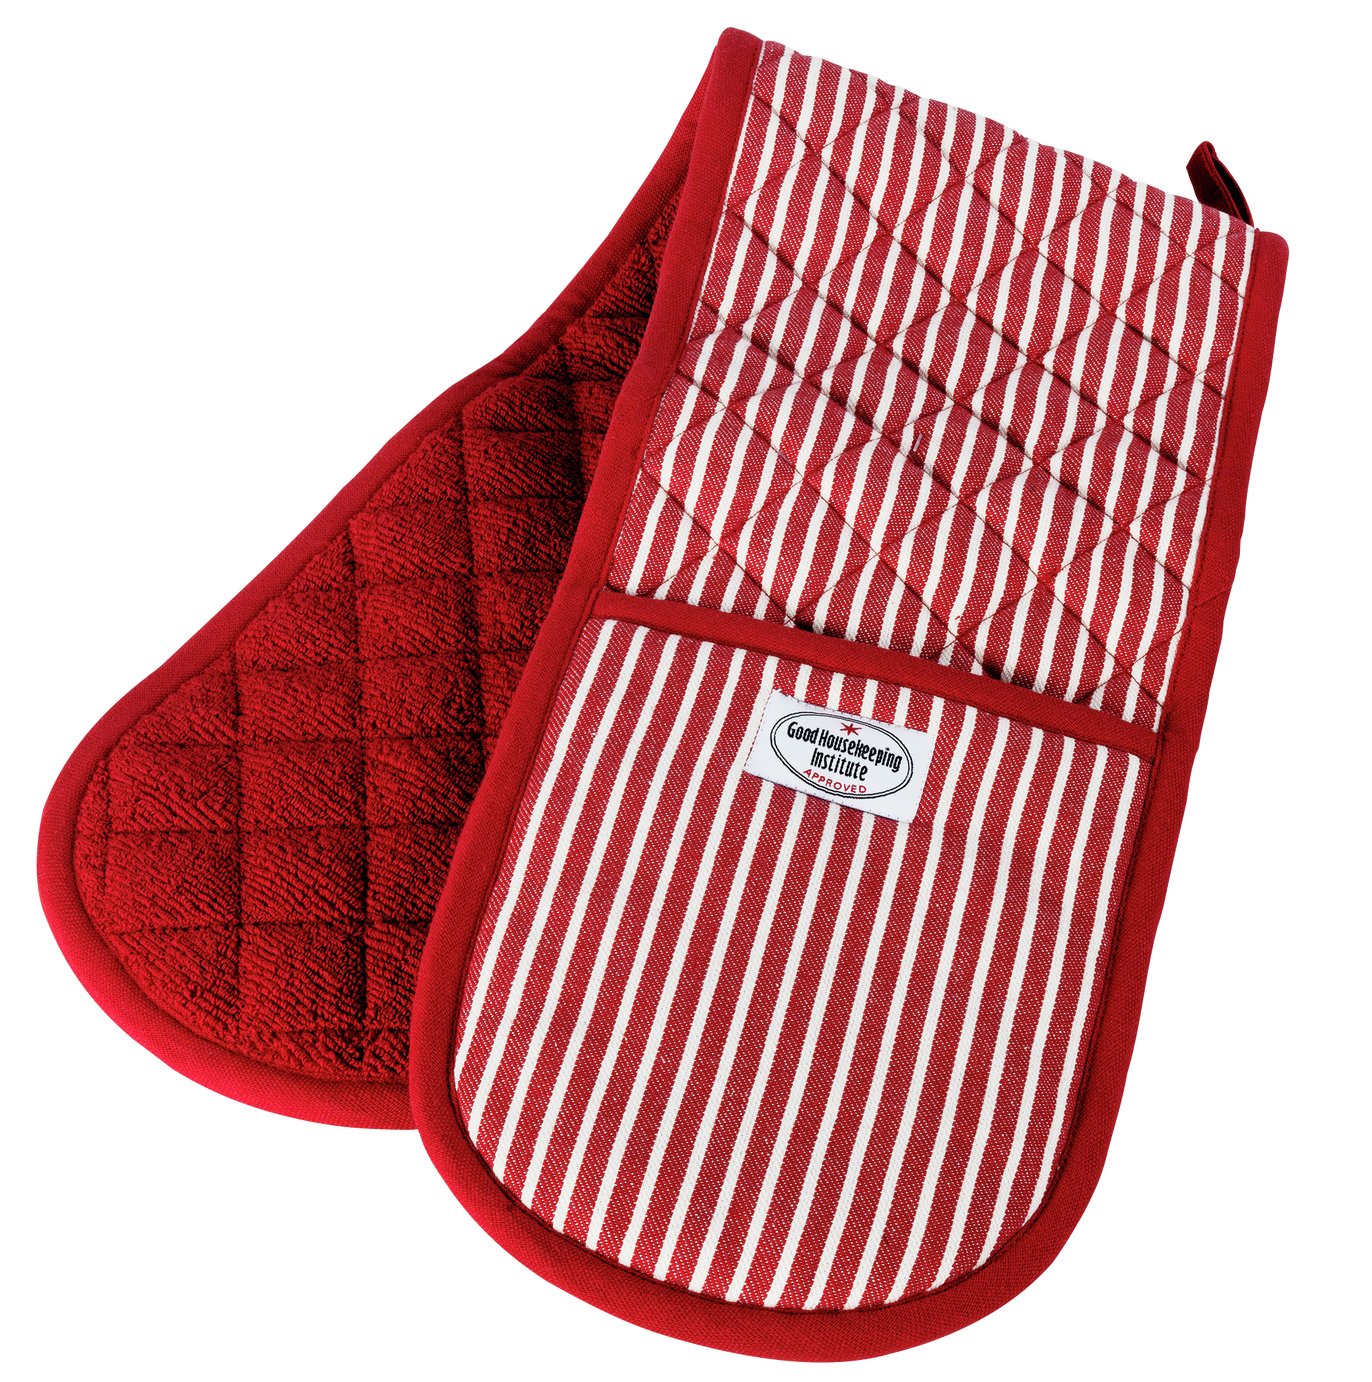 Good Housekeeping Double Oven Glove and Tea Towel Set Review